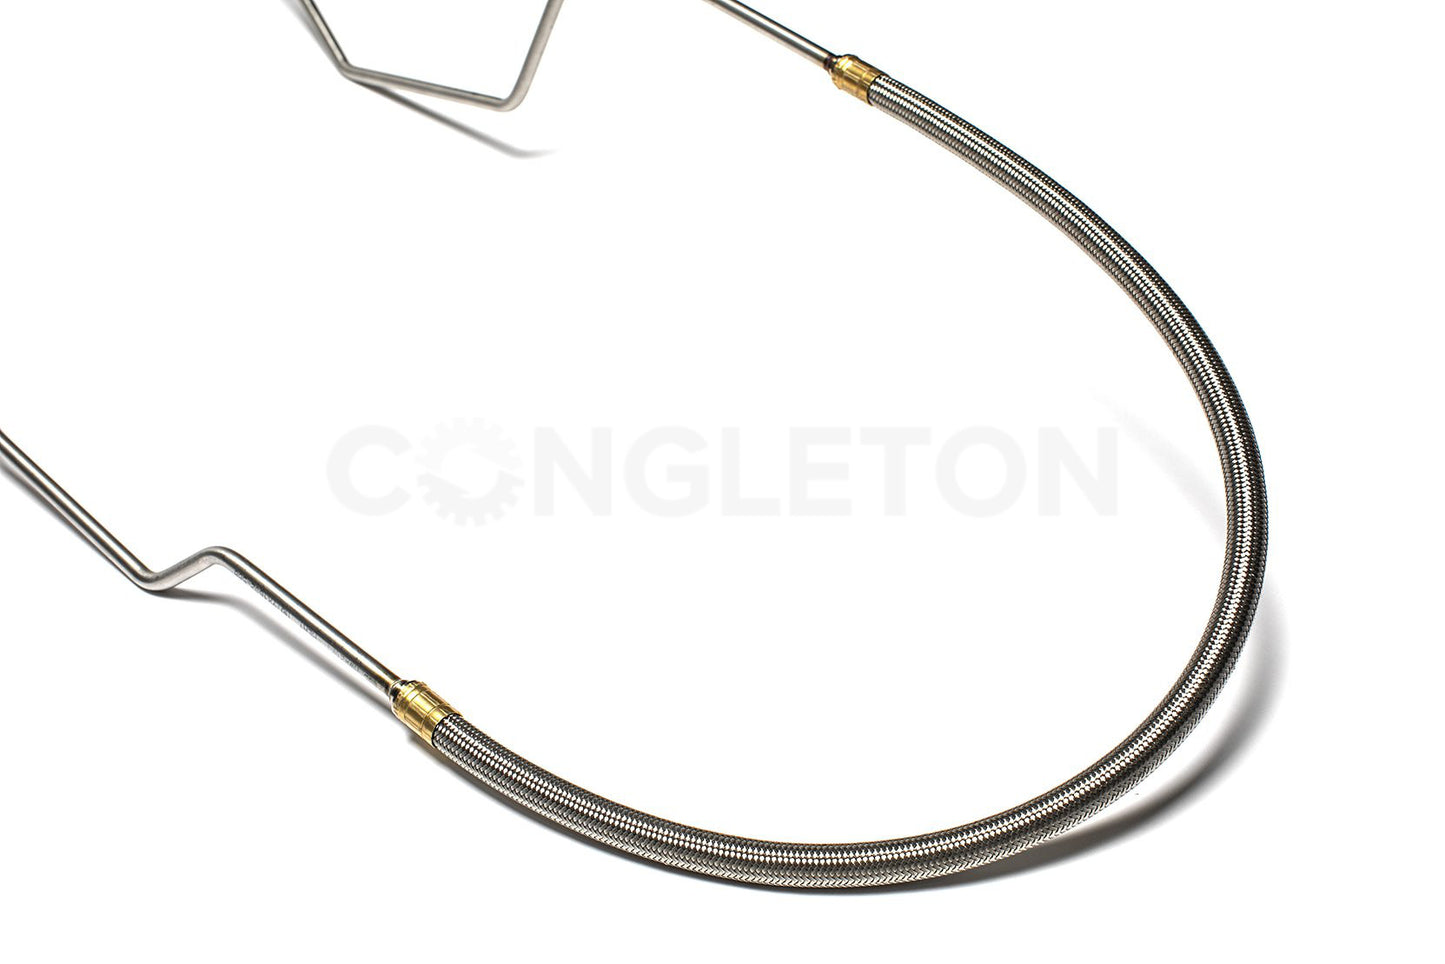 Range Rover Classic Stainless Fuel Line Kit for LWB